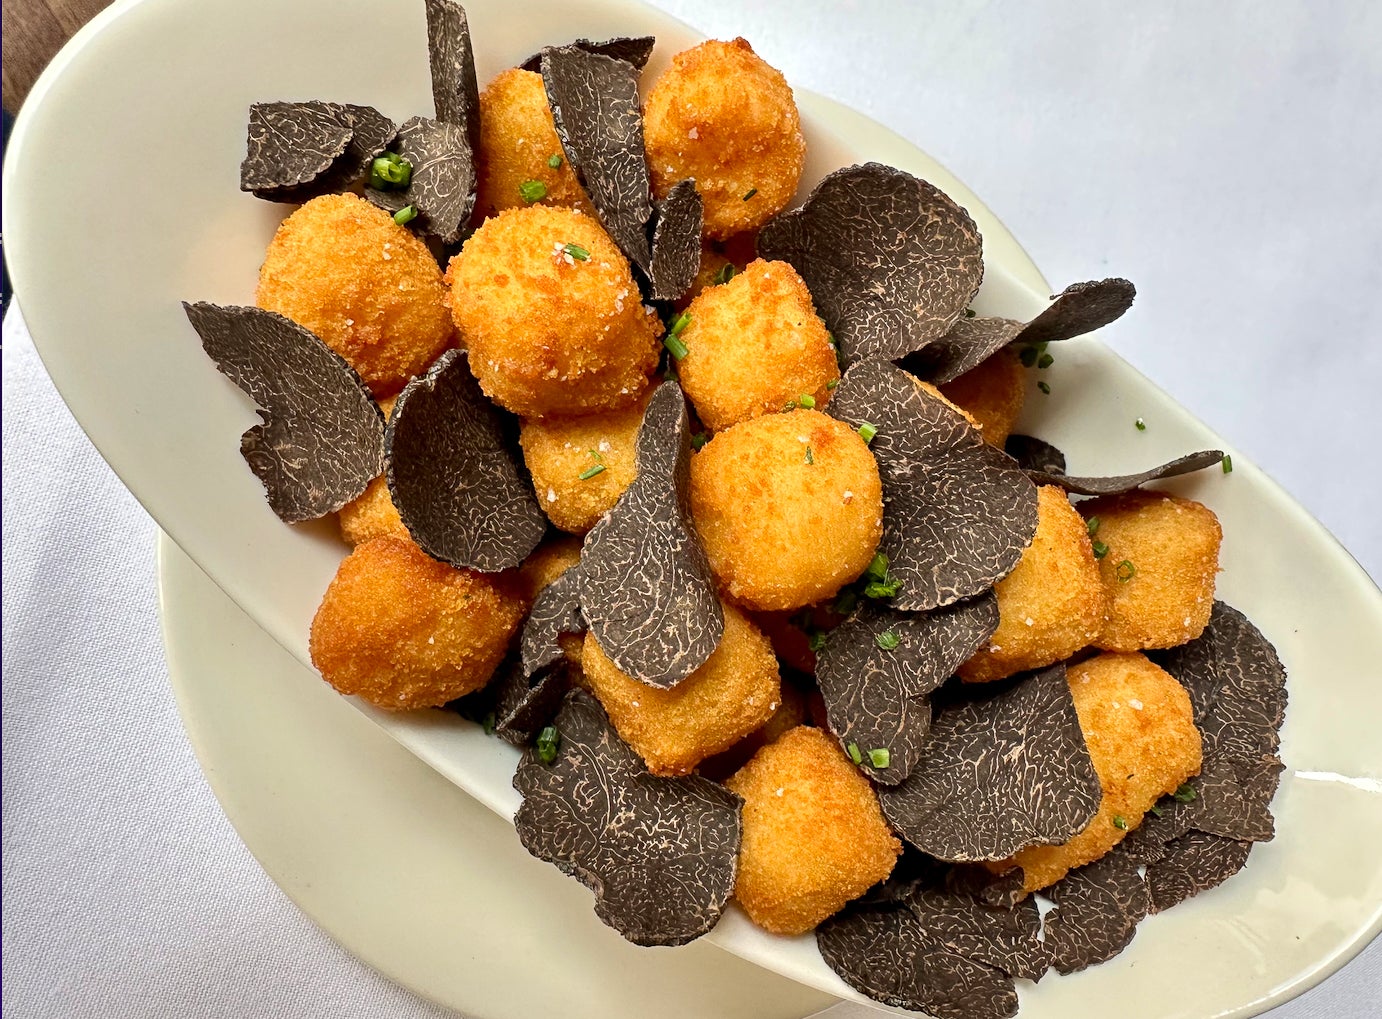 The truffle tater tots at Grill 23.